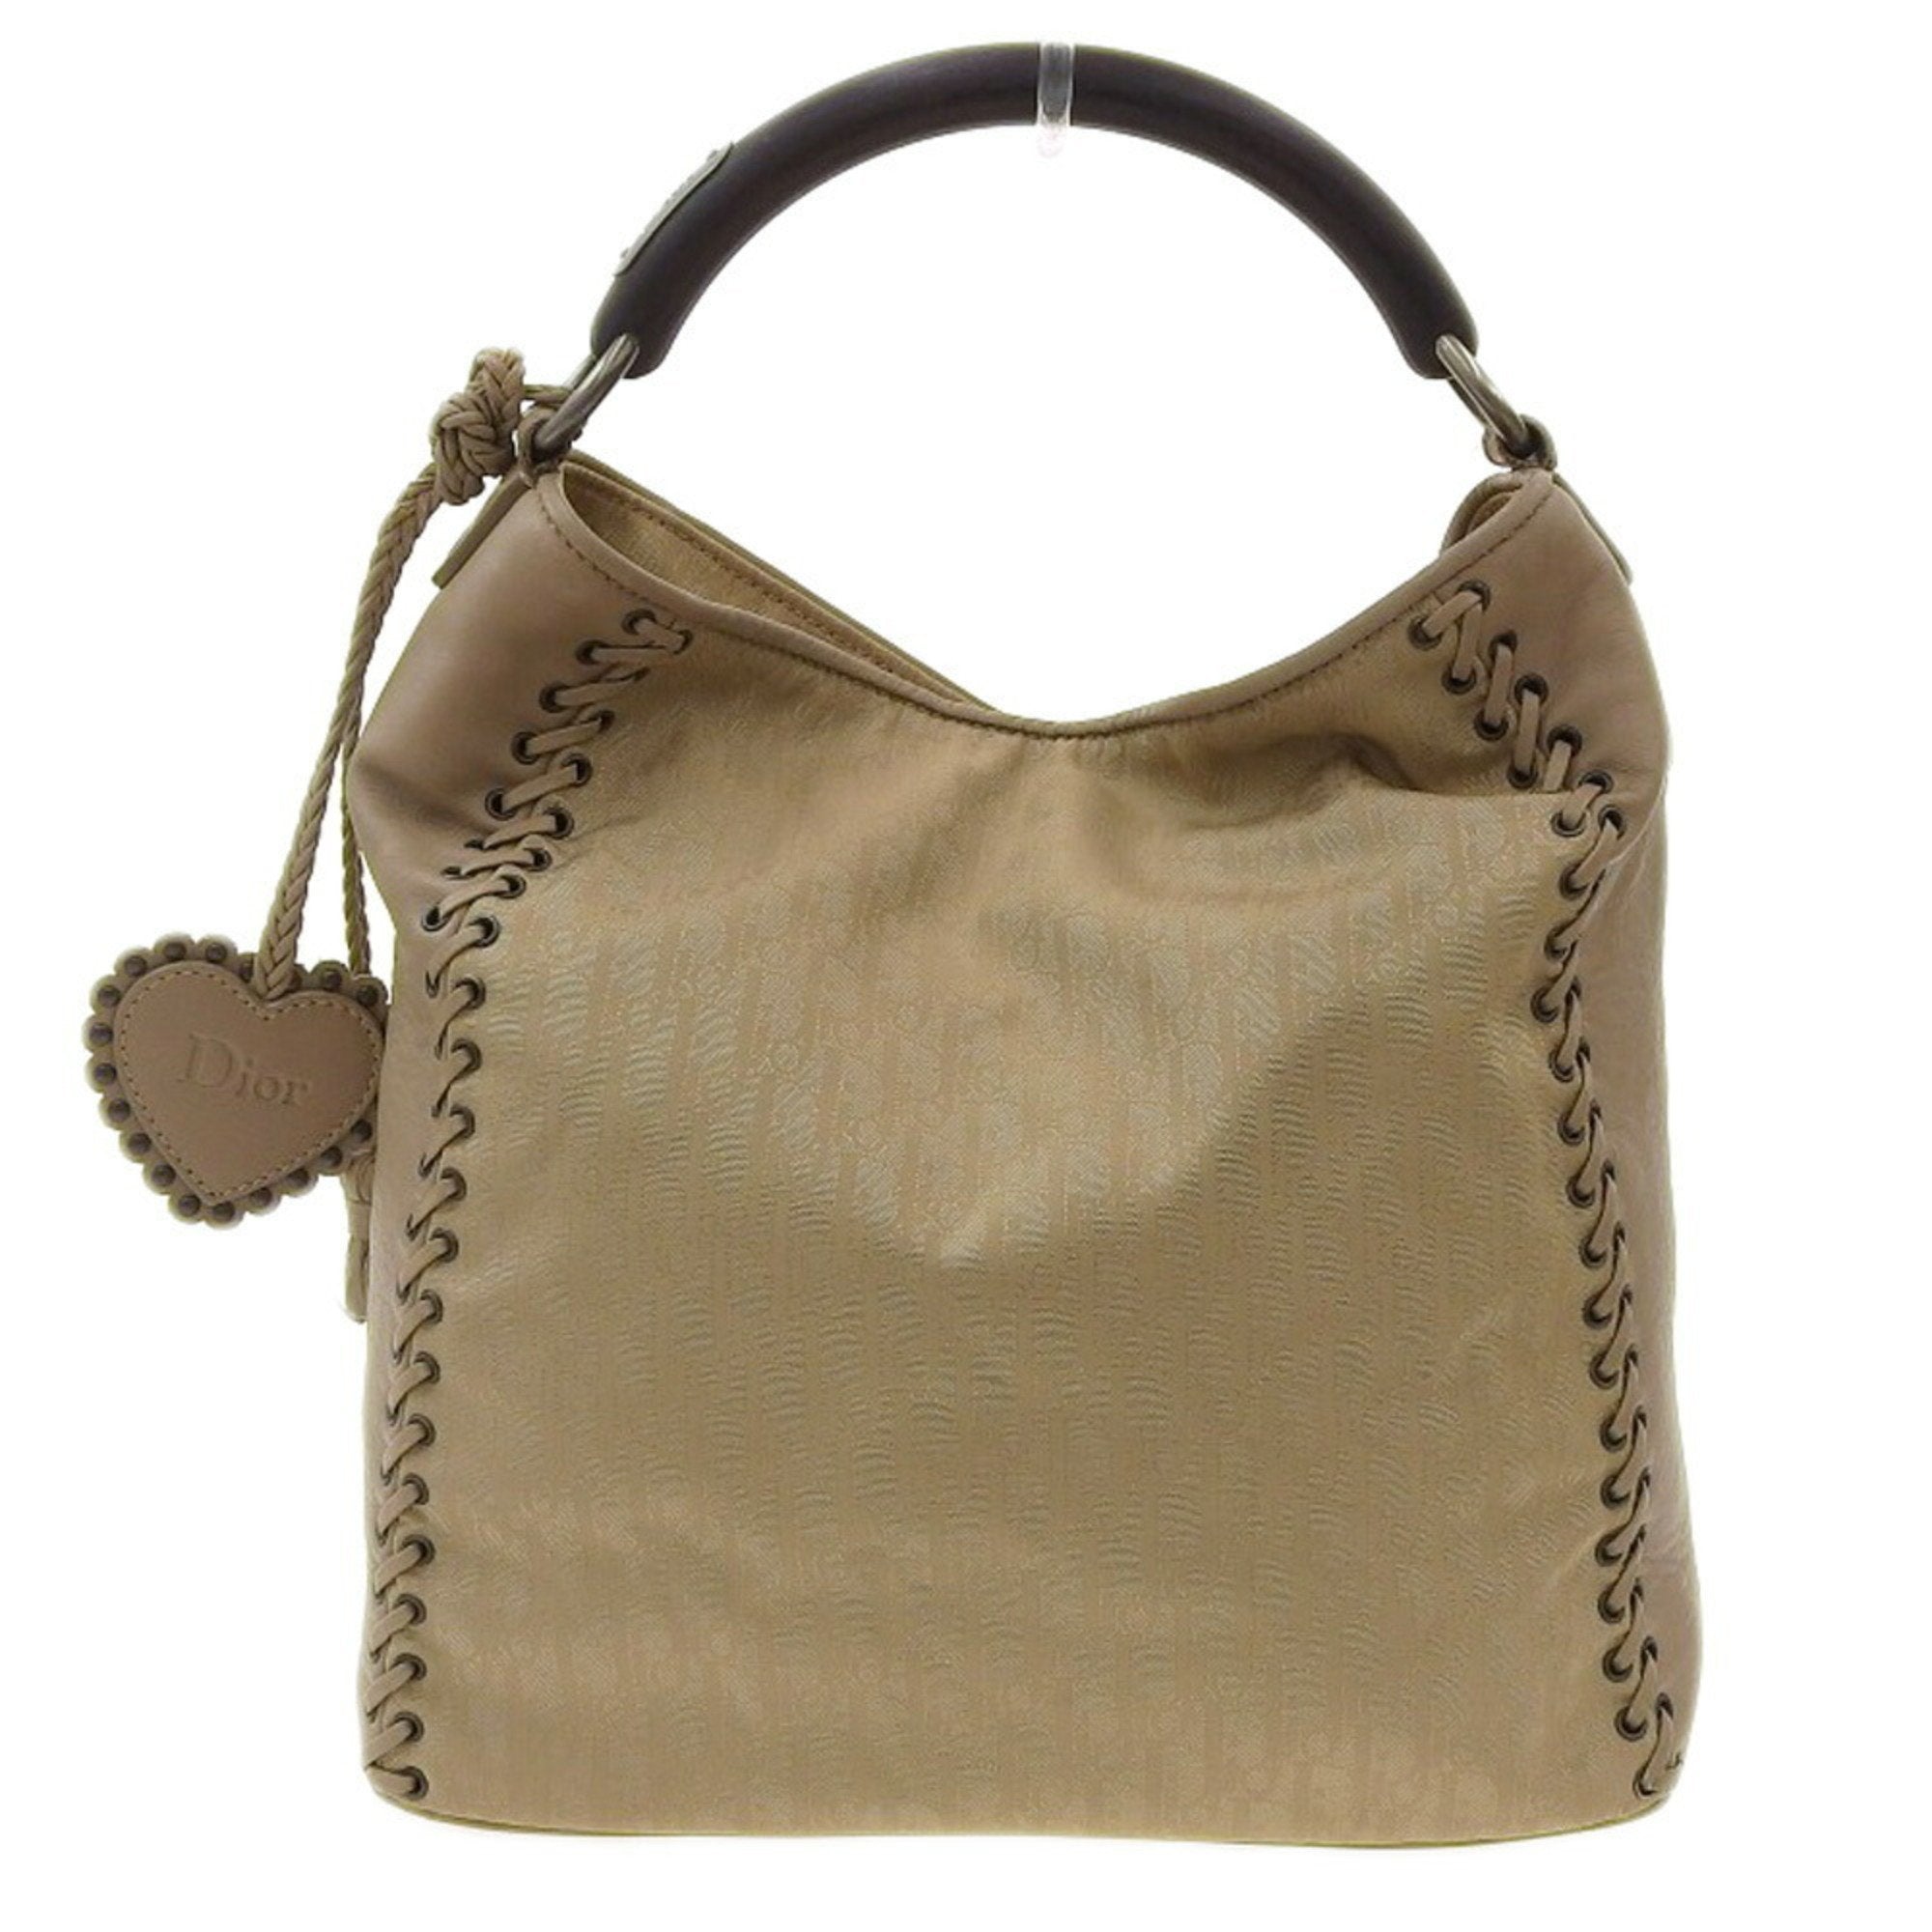 Dior Brown Calf w Diorissimo Canvas with Wooden Handle Document Handbag   The Attic Place